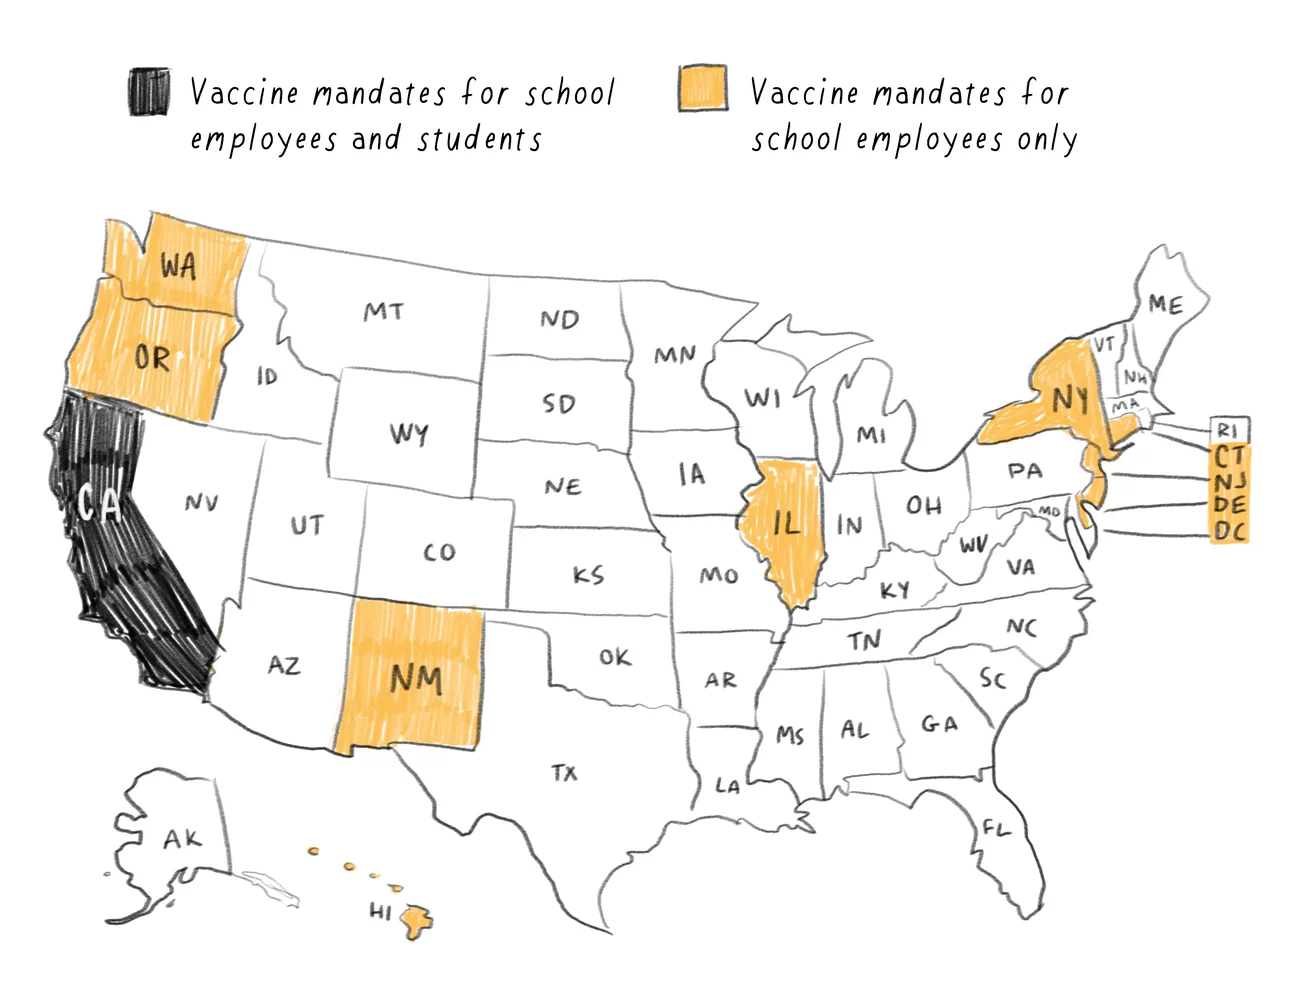 Coronavirus 2020 and vaccines in schools The COVID-19 pandemic is causing many children to miss basic vaccines.  And that stirs up anti-vaccination sentiment.